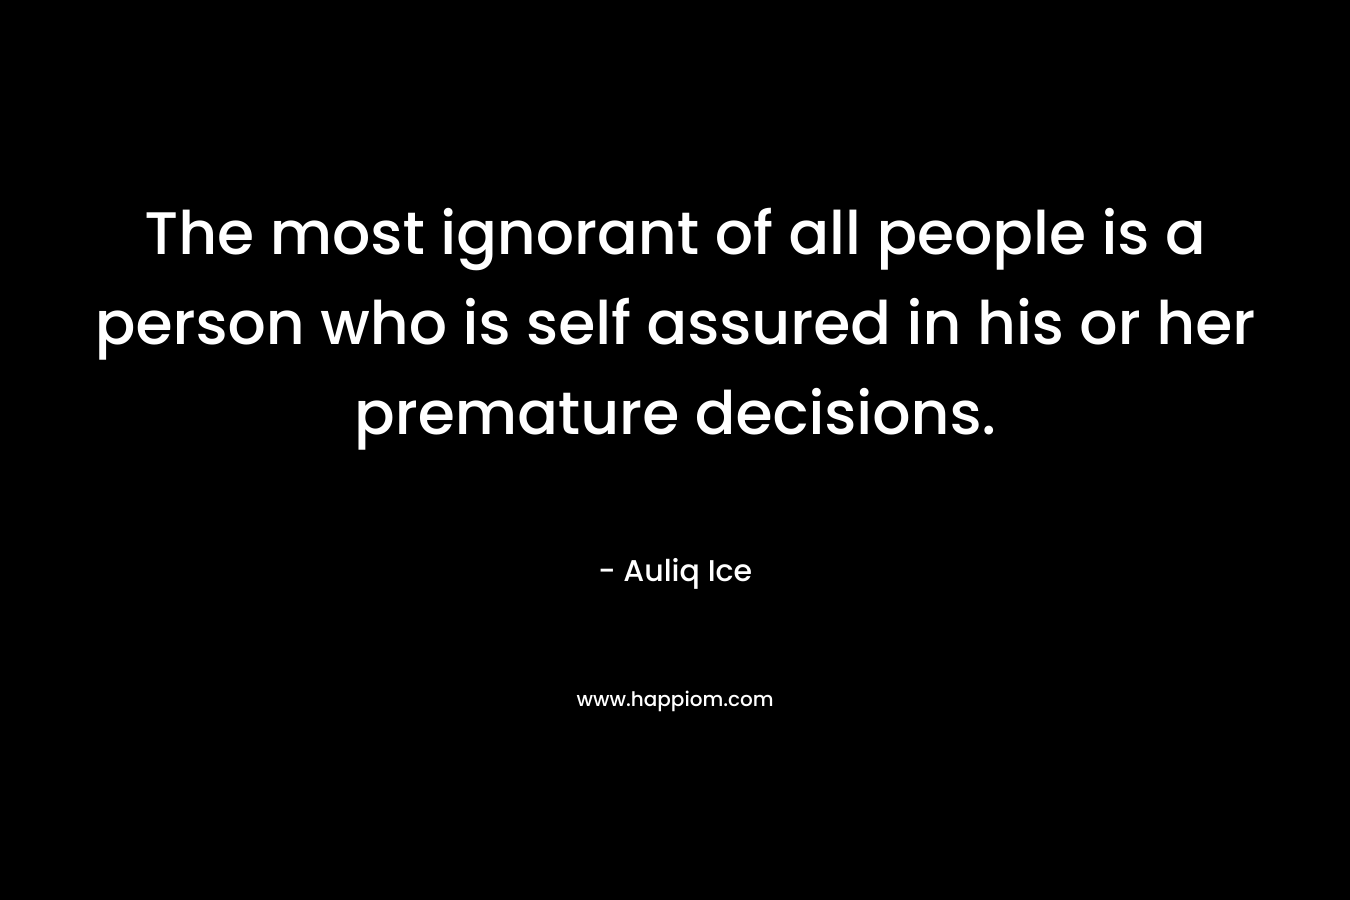 The most ignorant of all people is a person who is self assured in his or her premature decisions. – Auliq Ice